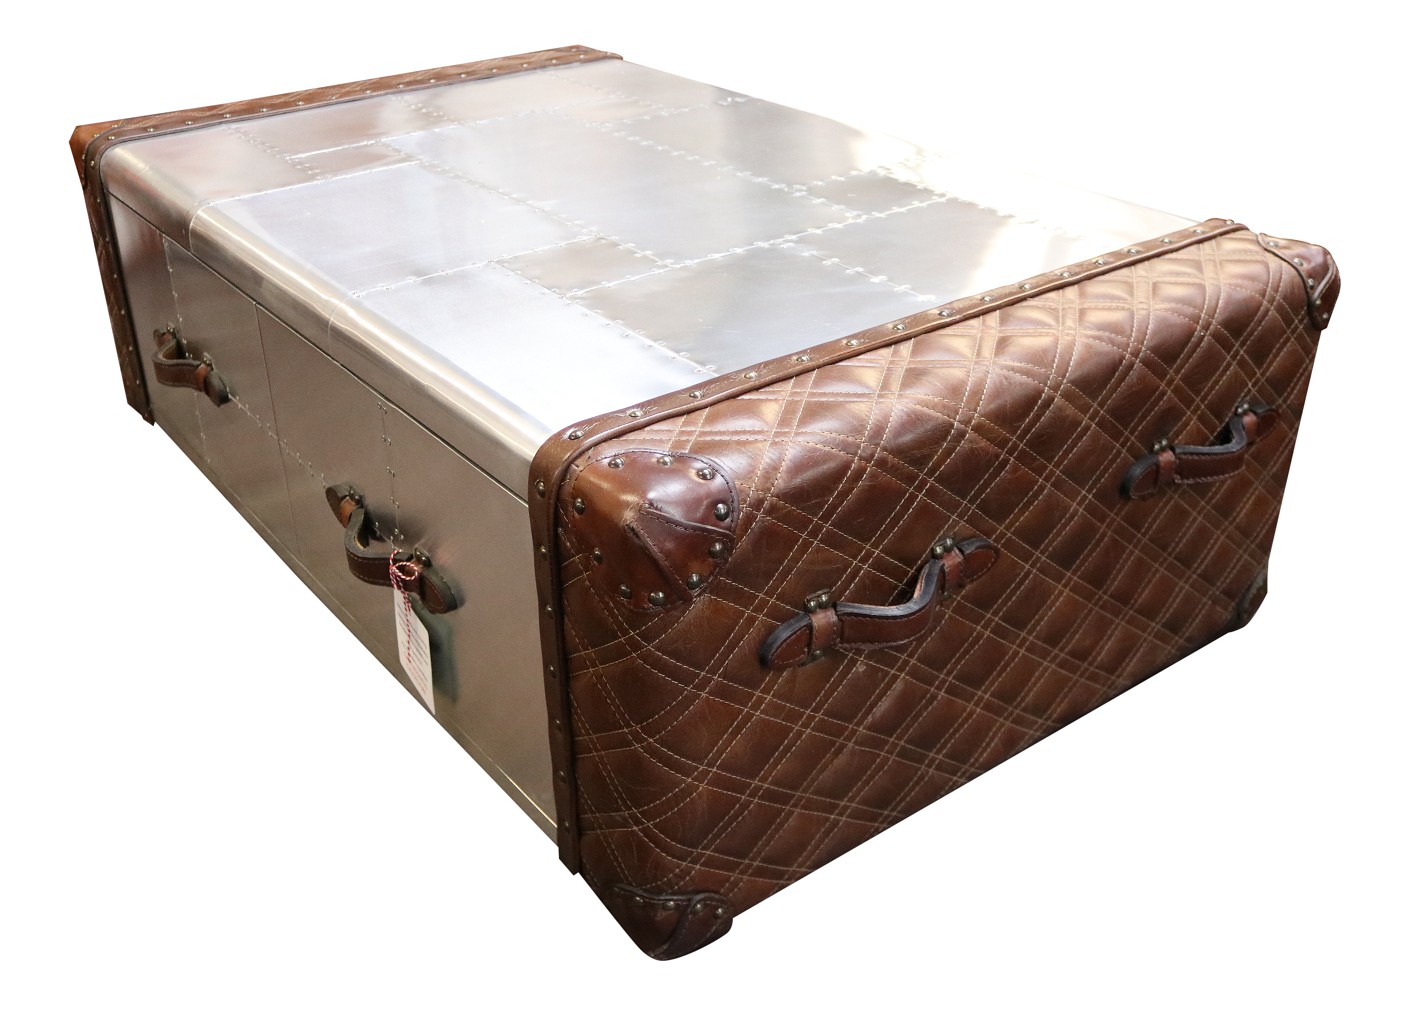 Stockists of Aviator 2 Drawer Coffee Table Vintage Metal Aluminium Brown Real Leather